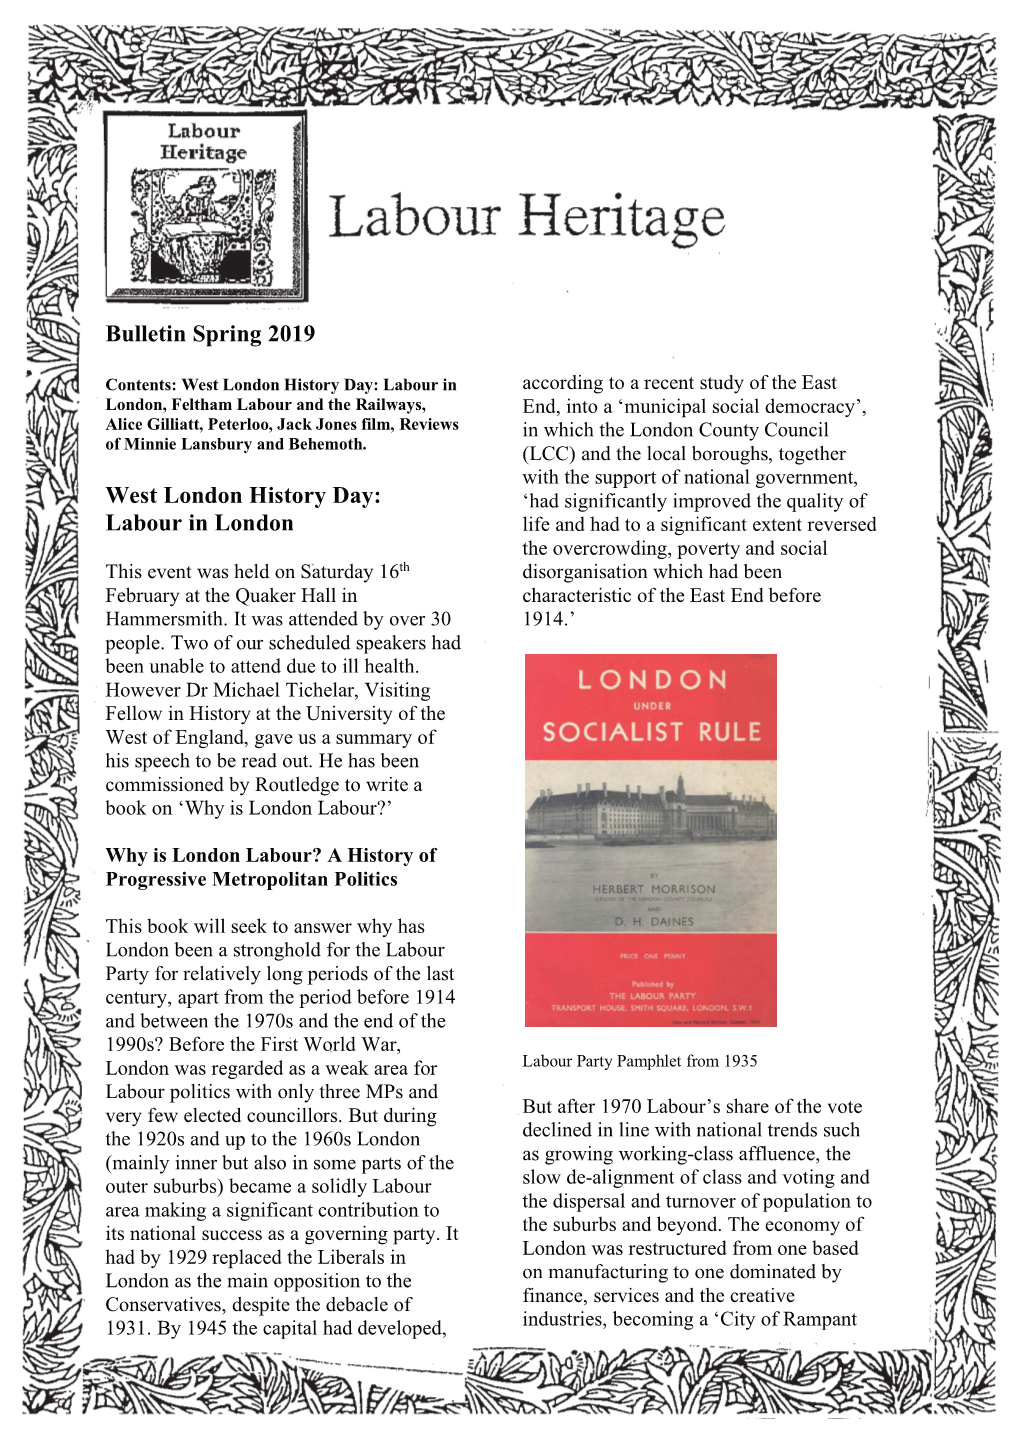 Bulletin Spring 2019 West London History Day: Labour in London